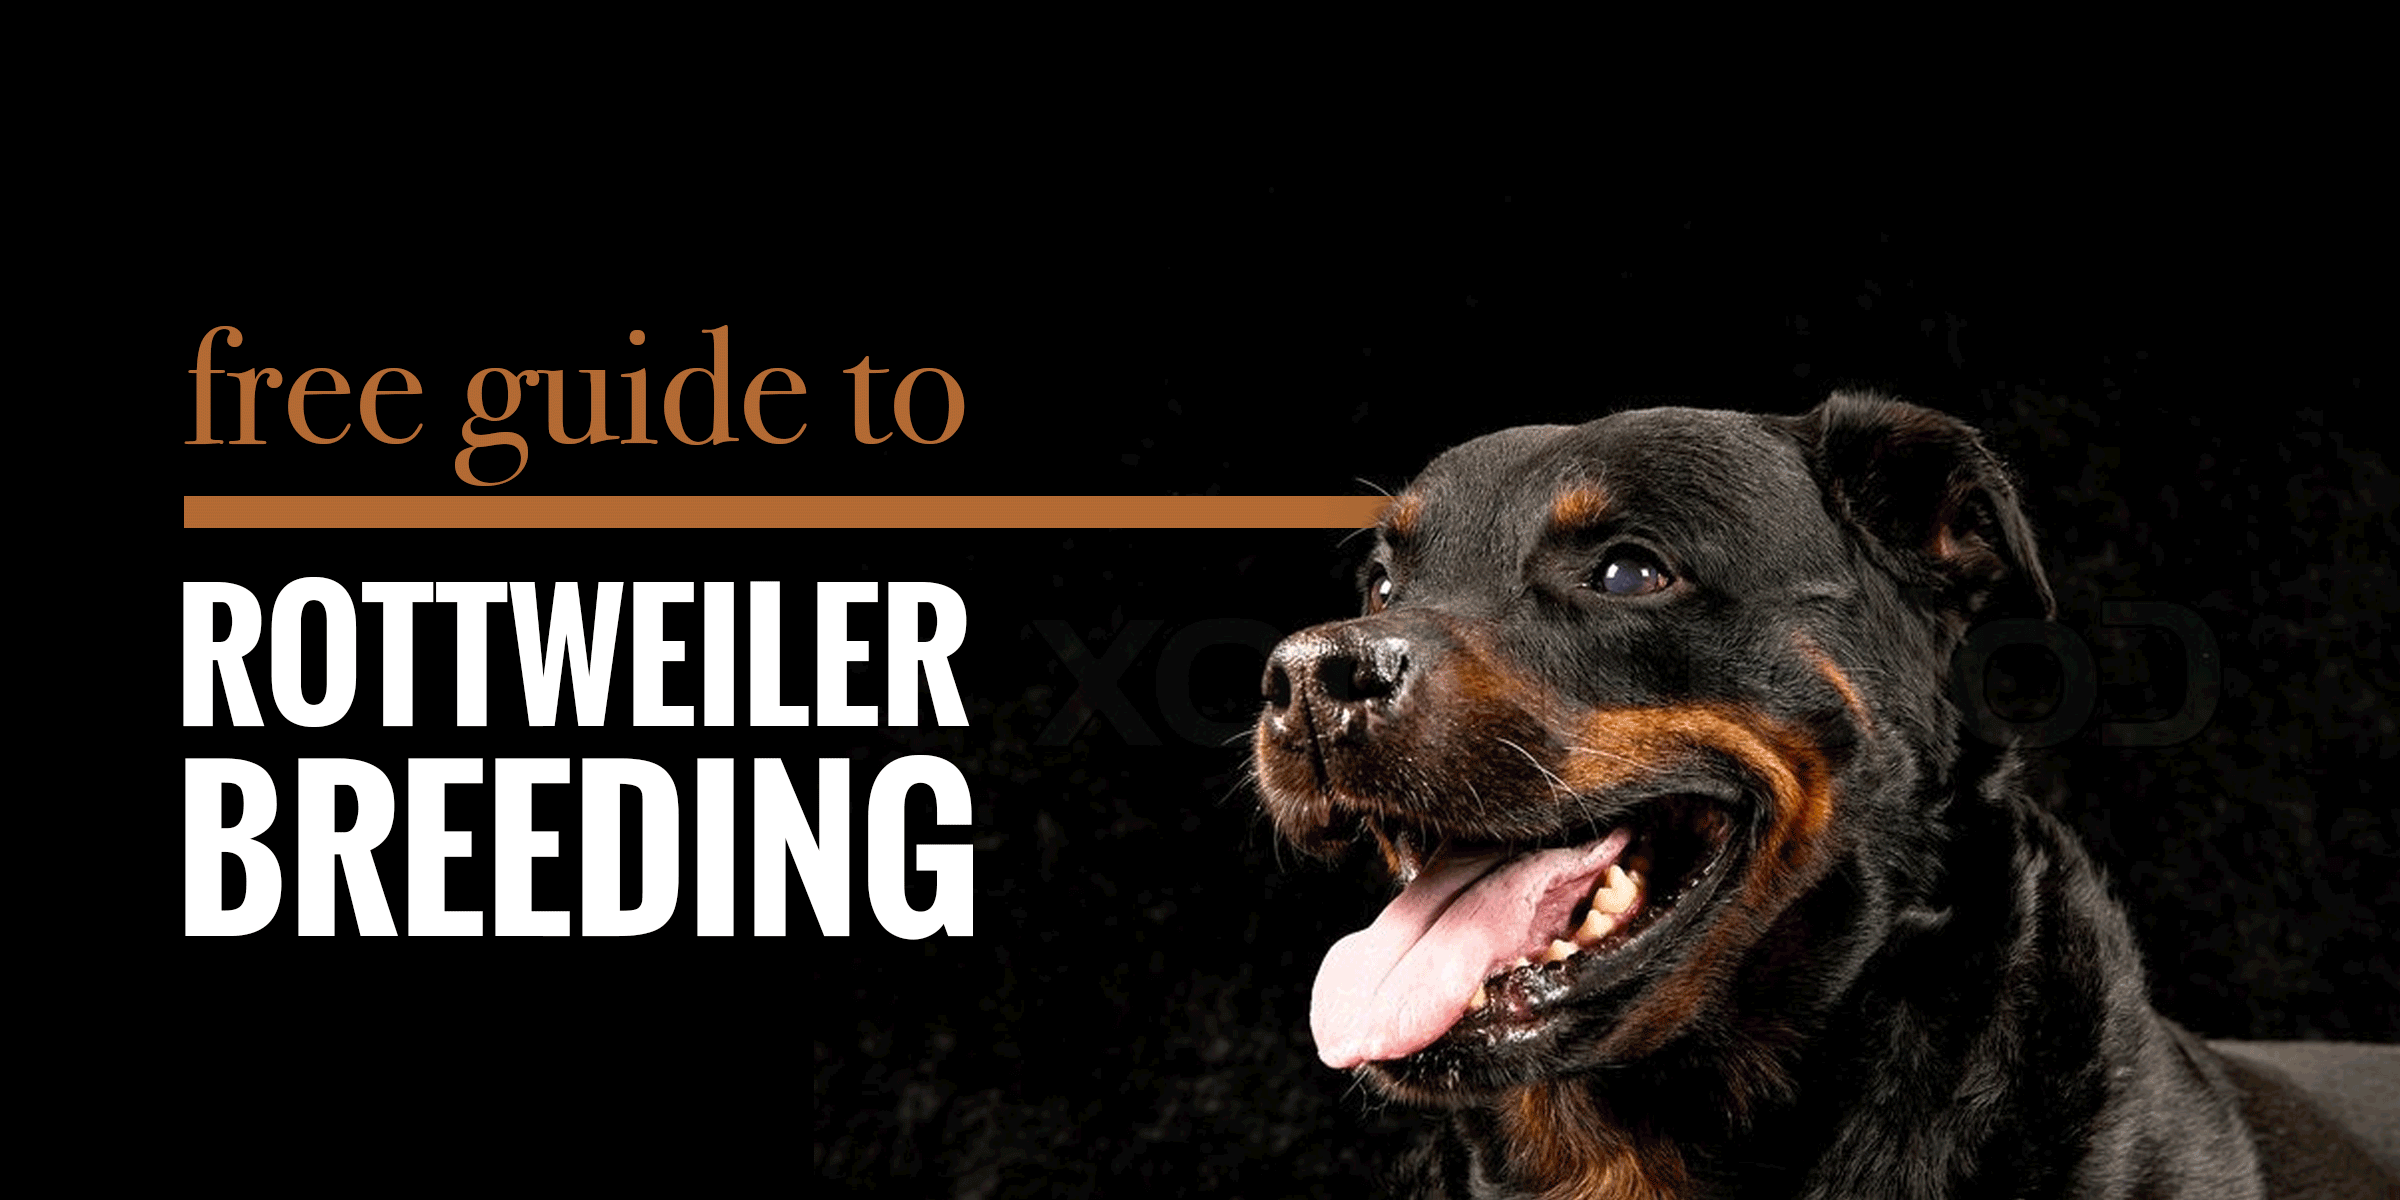 Guide to Breeding Rottweilers